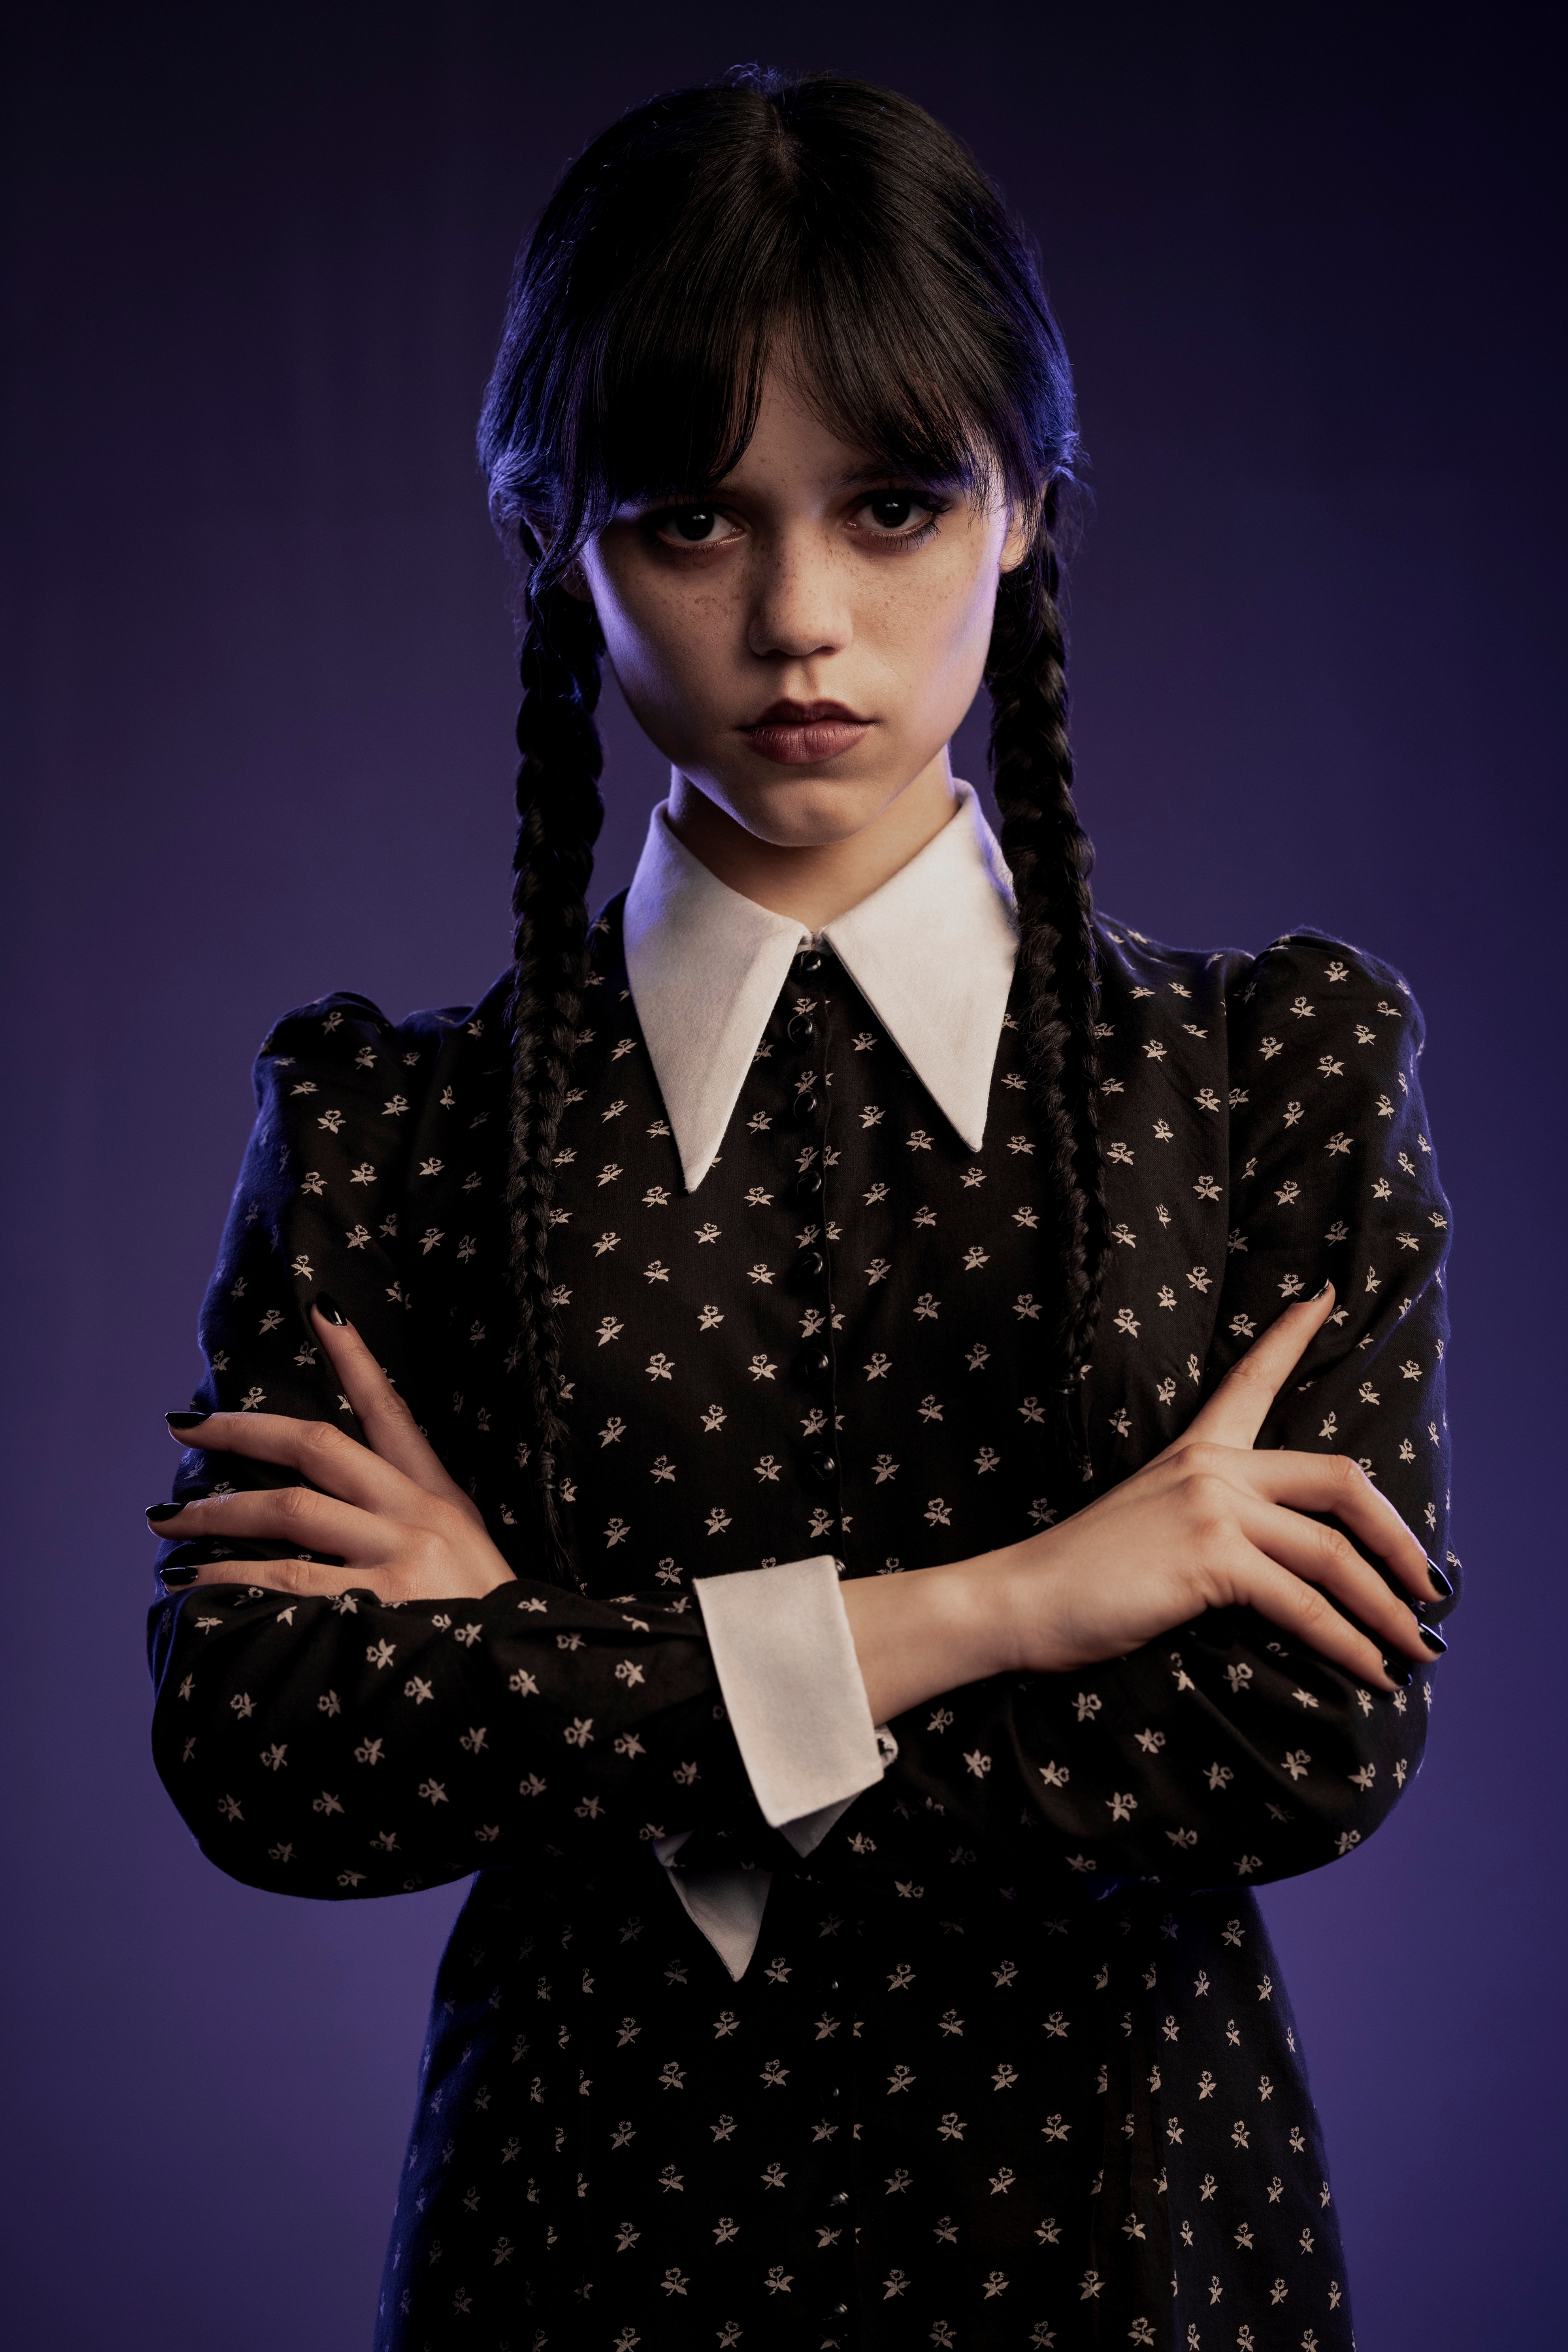 Jenna is best known for playing Wednesday Addams in the Netflix show Wednesday